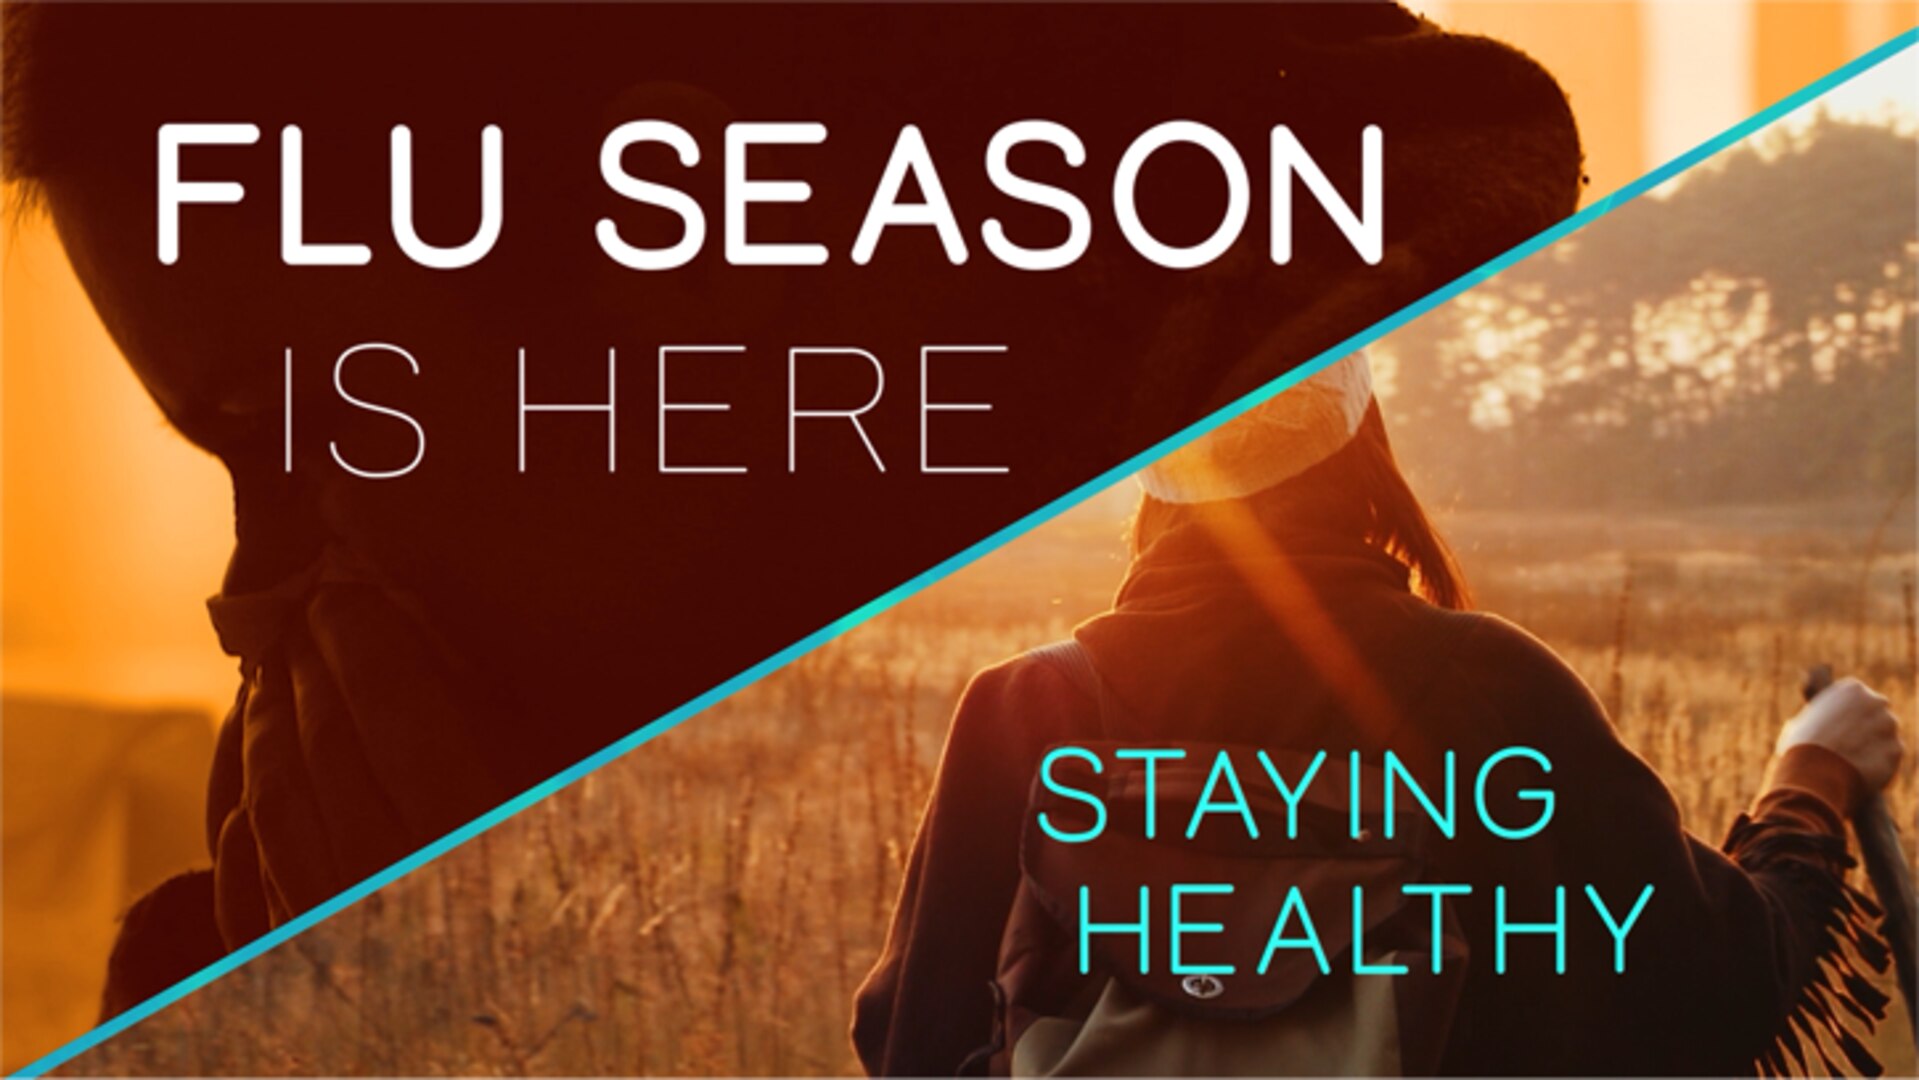 FLU SEASON IS HERE AND GETTING YOUR FLU VACCINE IS THE BEST WAY TO STOP THE SPREAD.